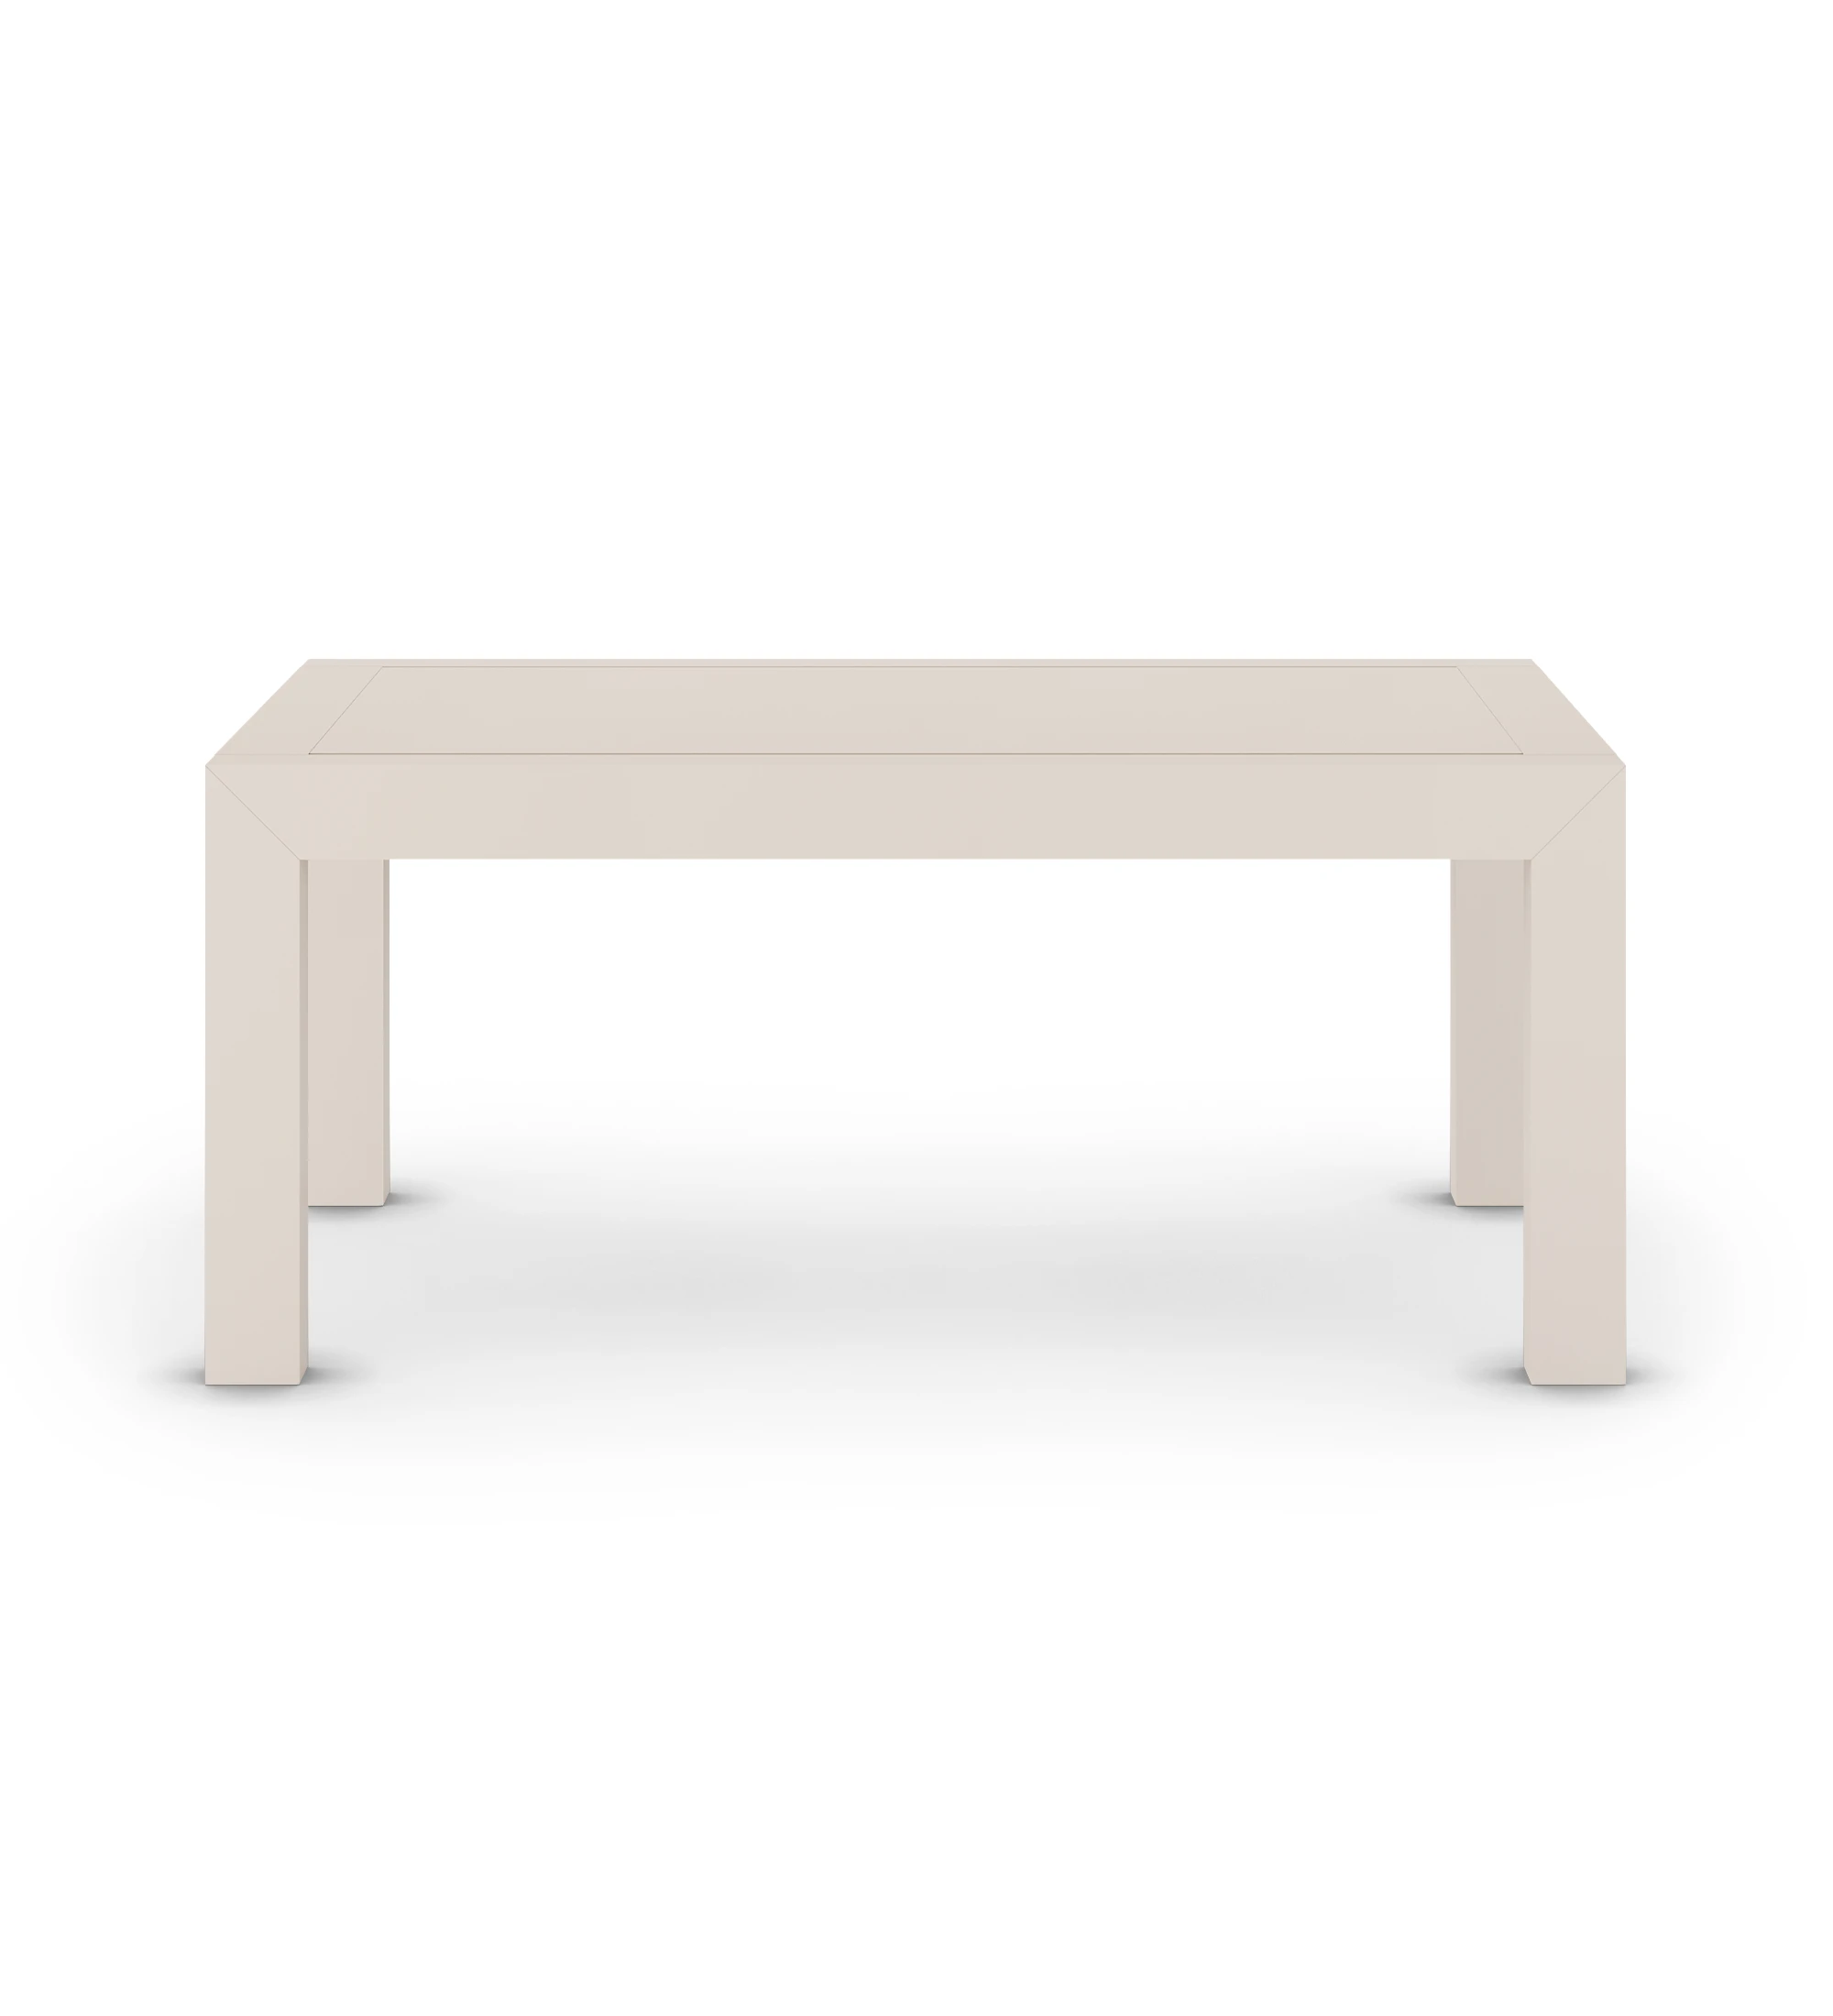 Pearl lacquered rectangular extendable dining table.